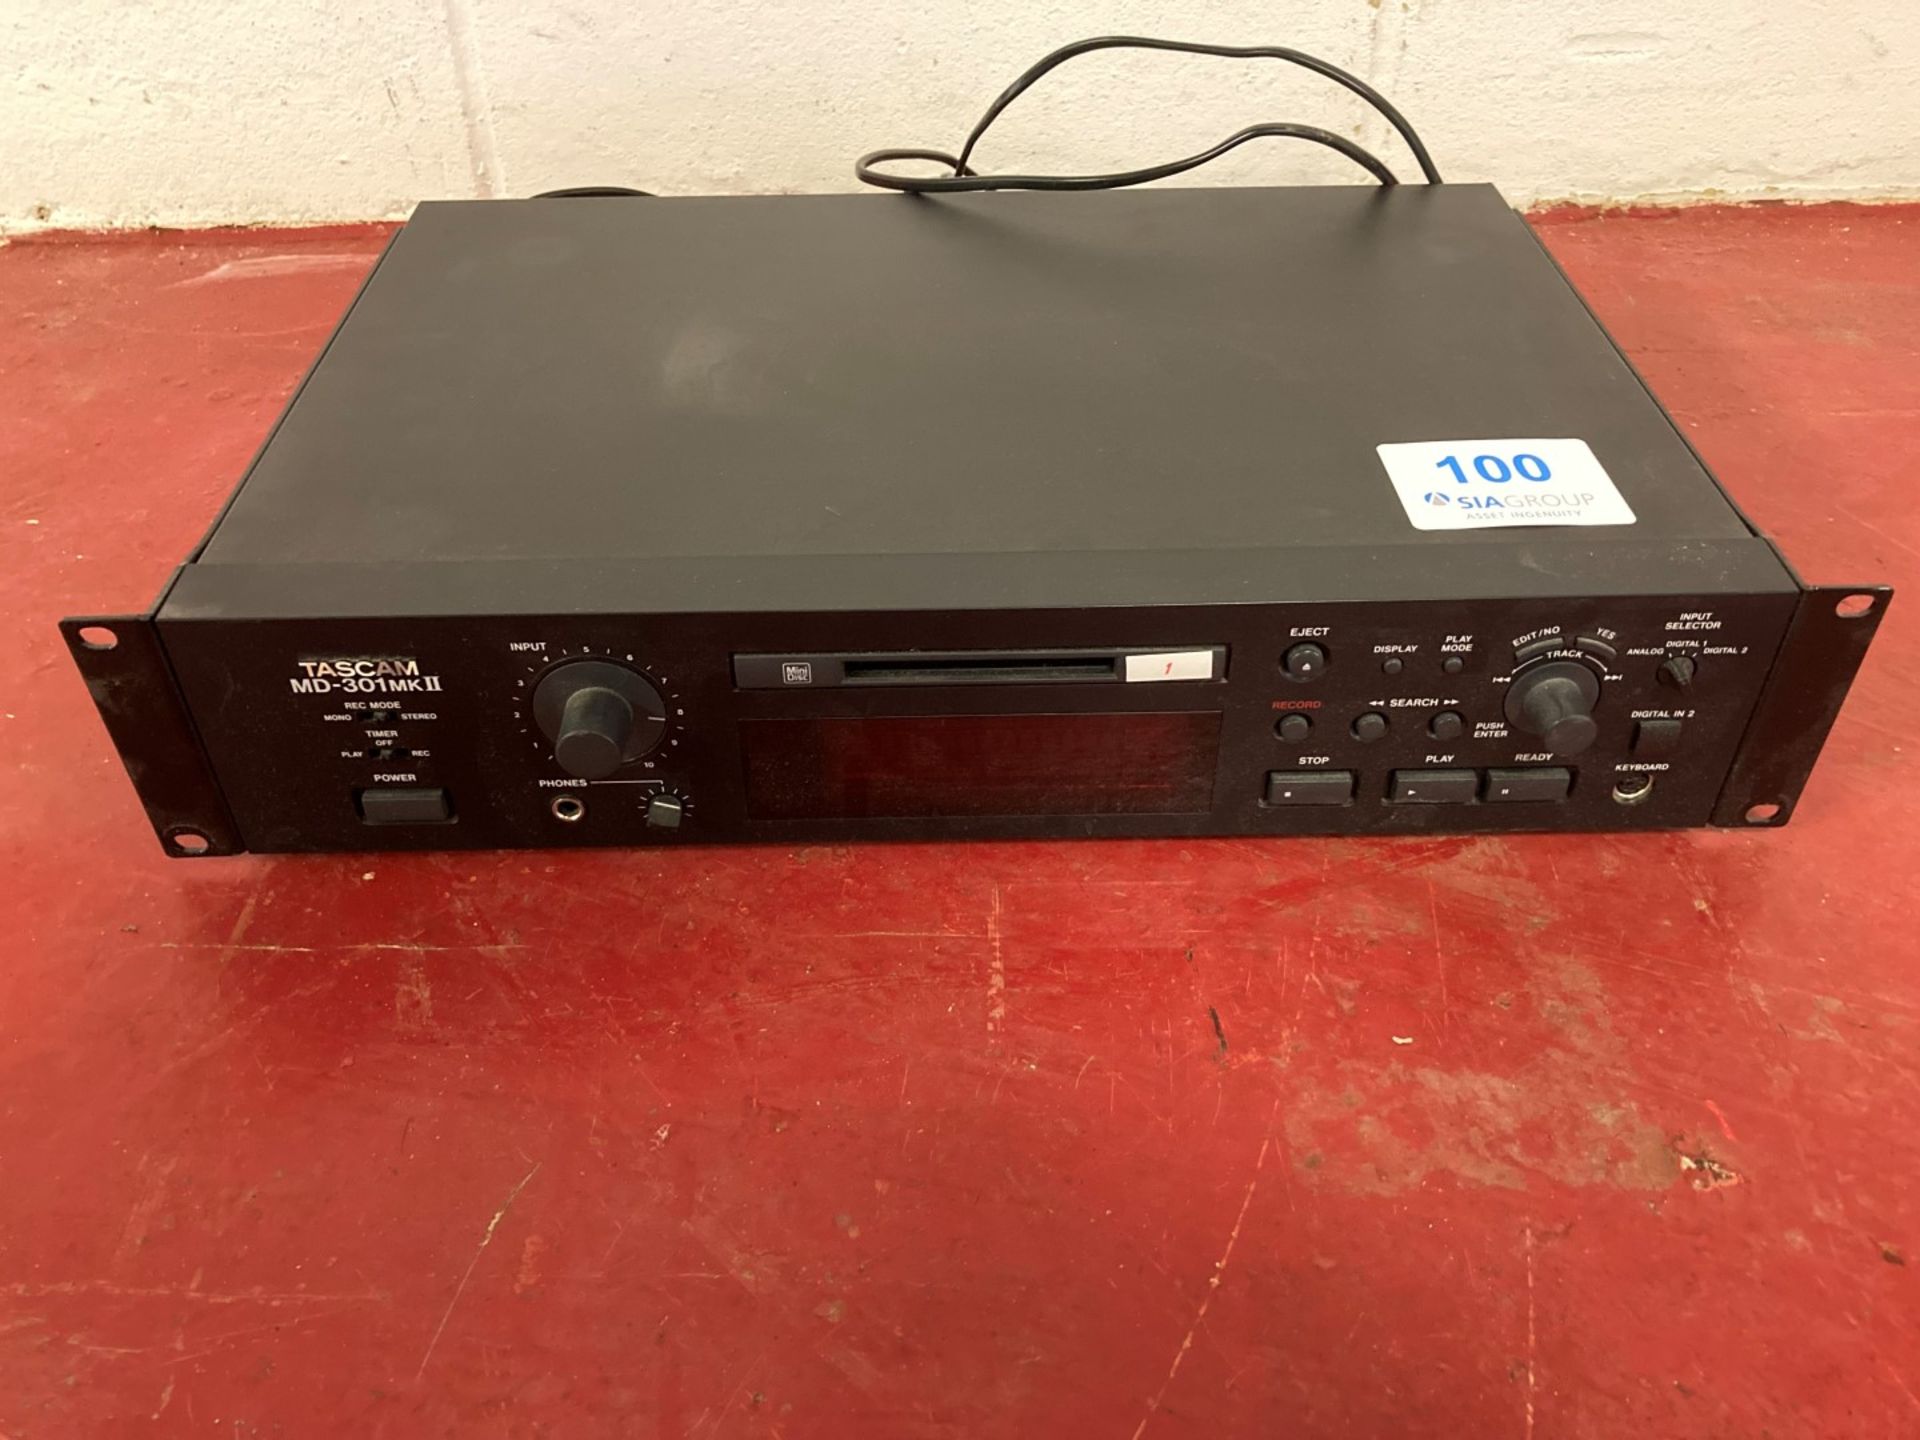 Tascam MD-301 MKII mini disk player / recorder